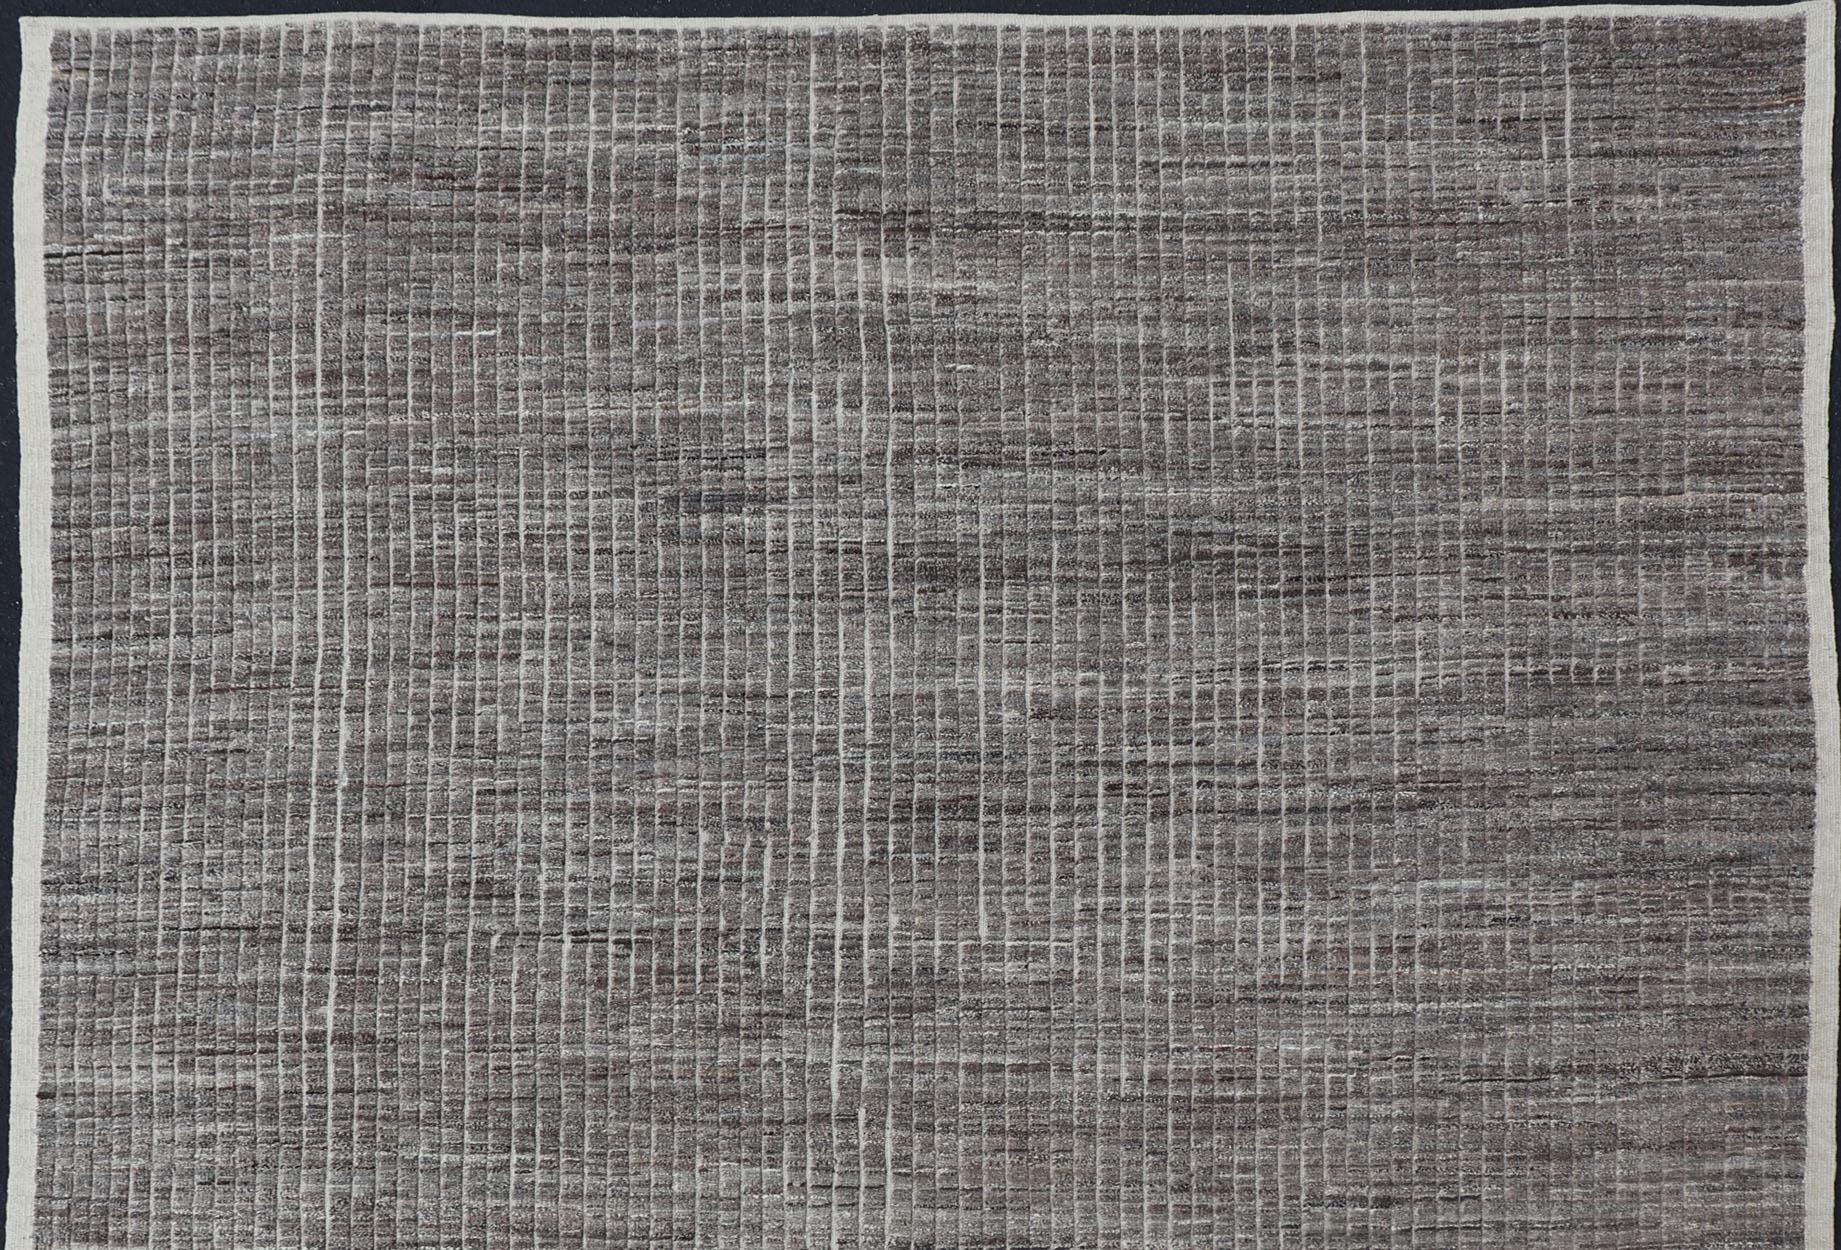 Modern Kilim-piled rug with checkerboard design in gray. Keivan Woven Arts / rug AFG-36093, country of origin / type: Afghanistan / Kilim, condition: new

This brand new rug features a modern checkerboard design and a combination flat-woven-piled